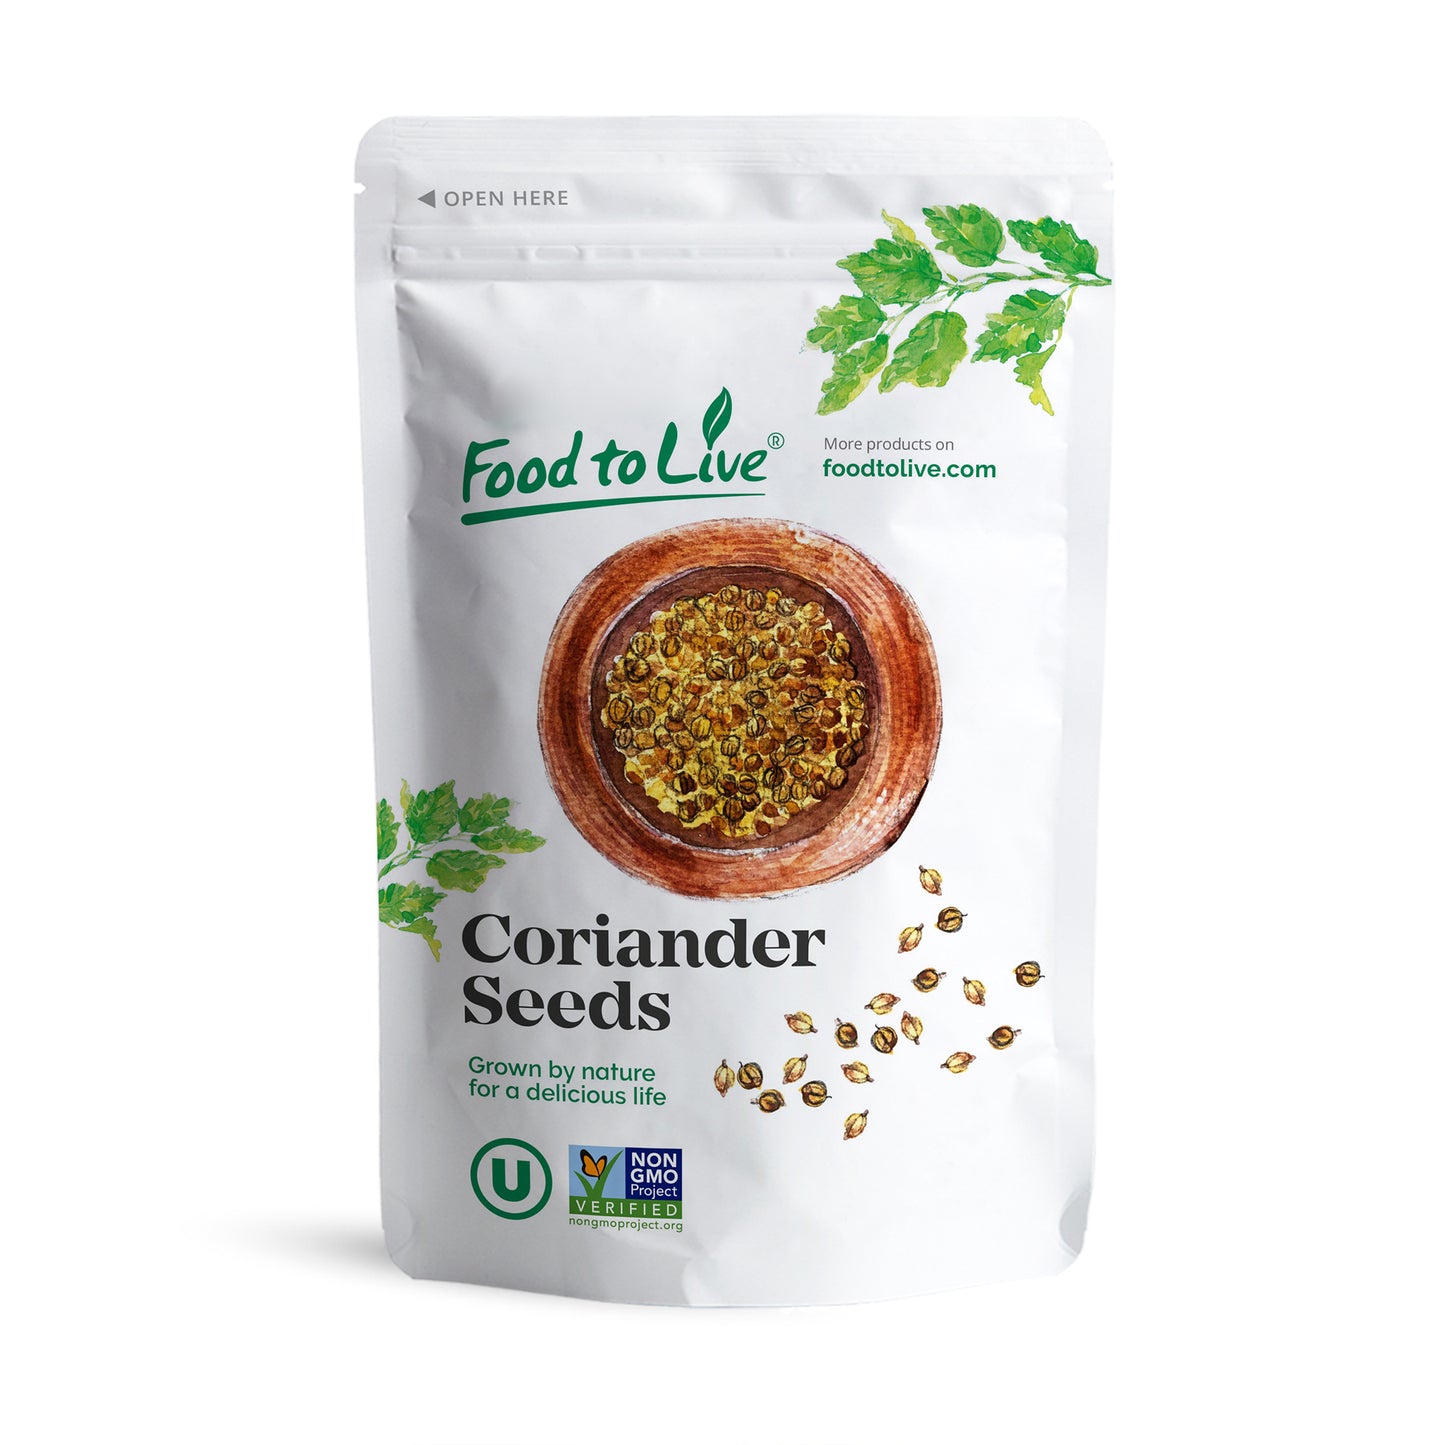 Coriander Seeds Whole — Non-GMO Verified, Kosher, Bulk - by Food to Live